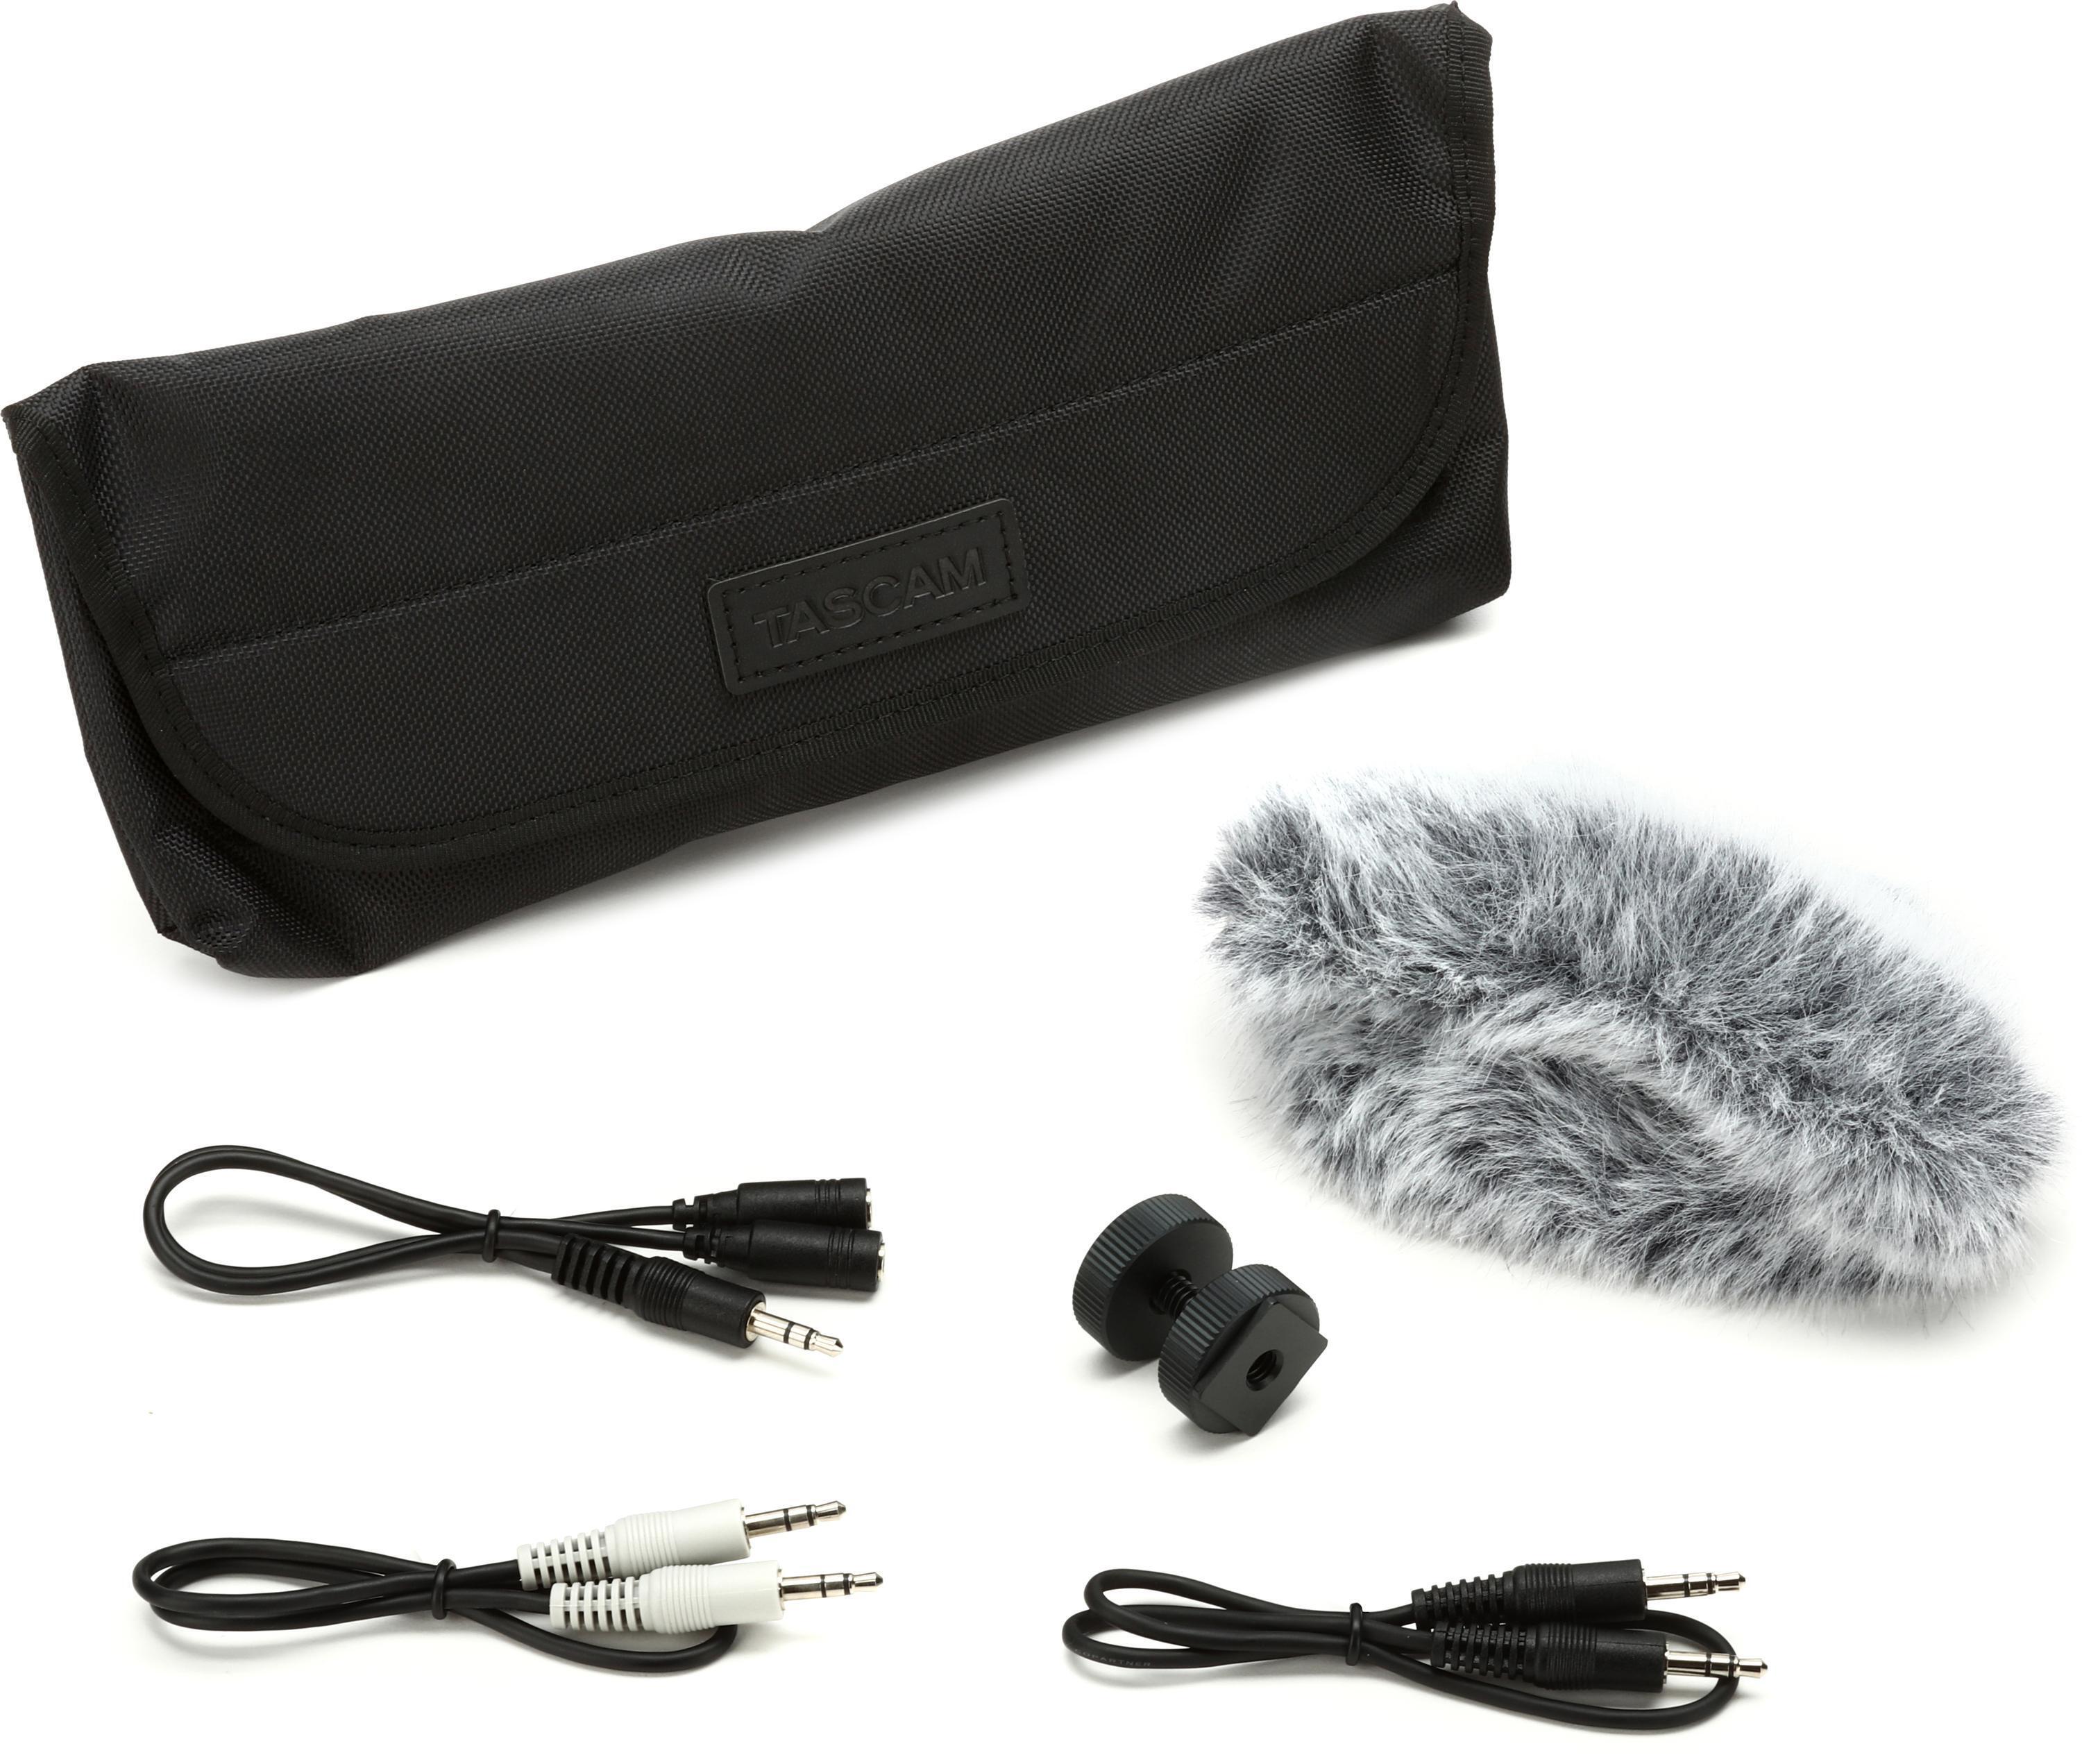 TASCAM AK-DR11CMKII Accessory Pack for DR Series | Sweetwater